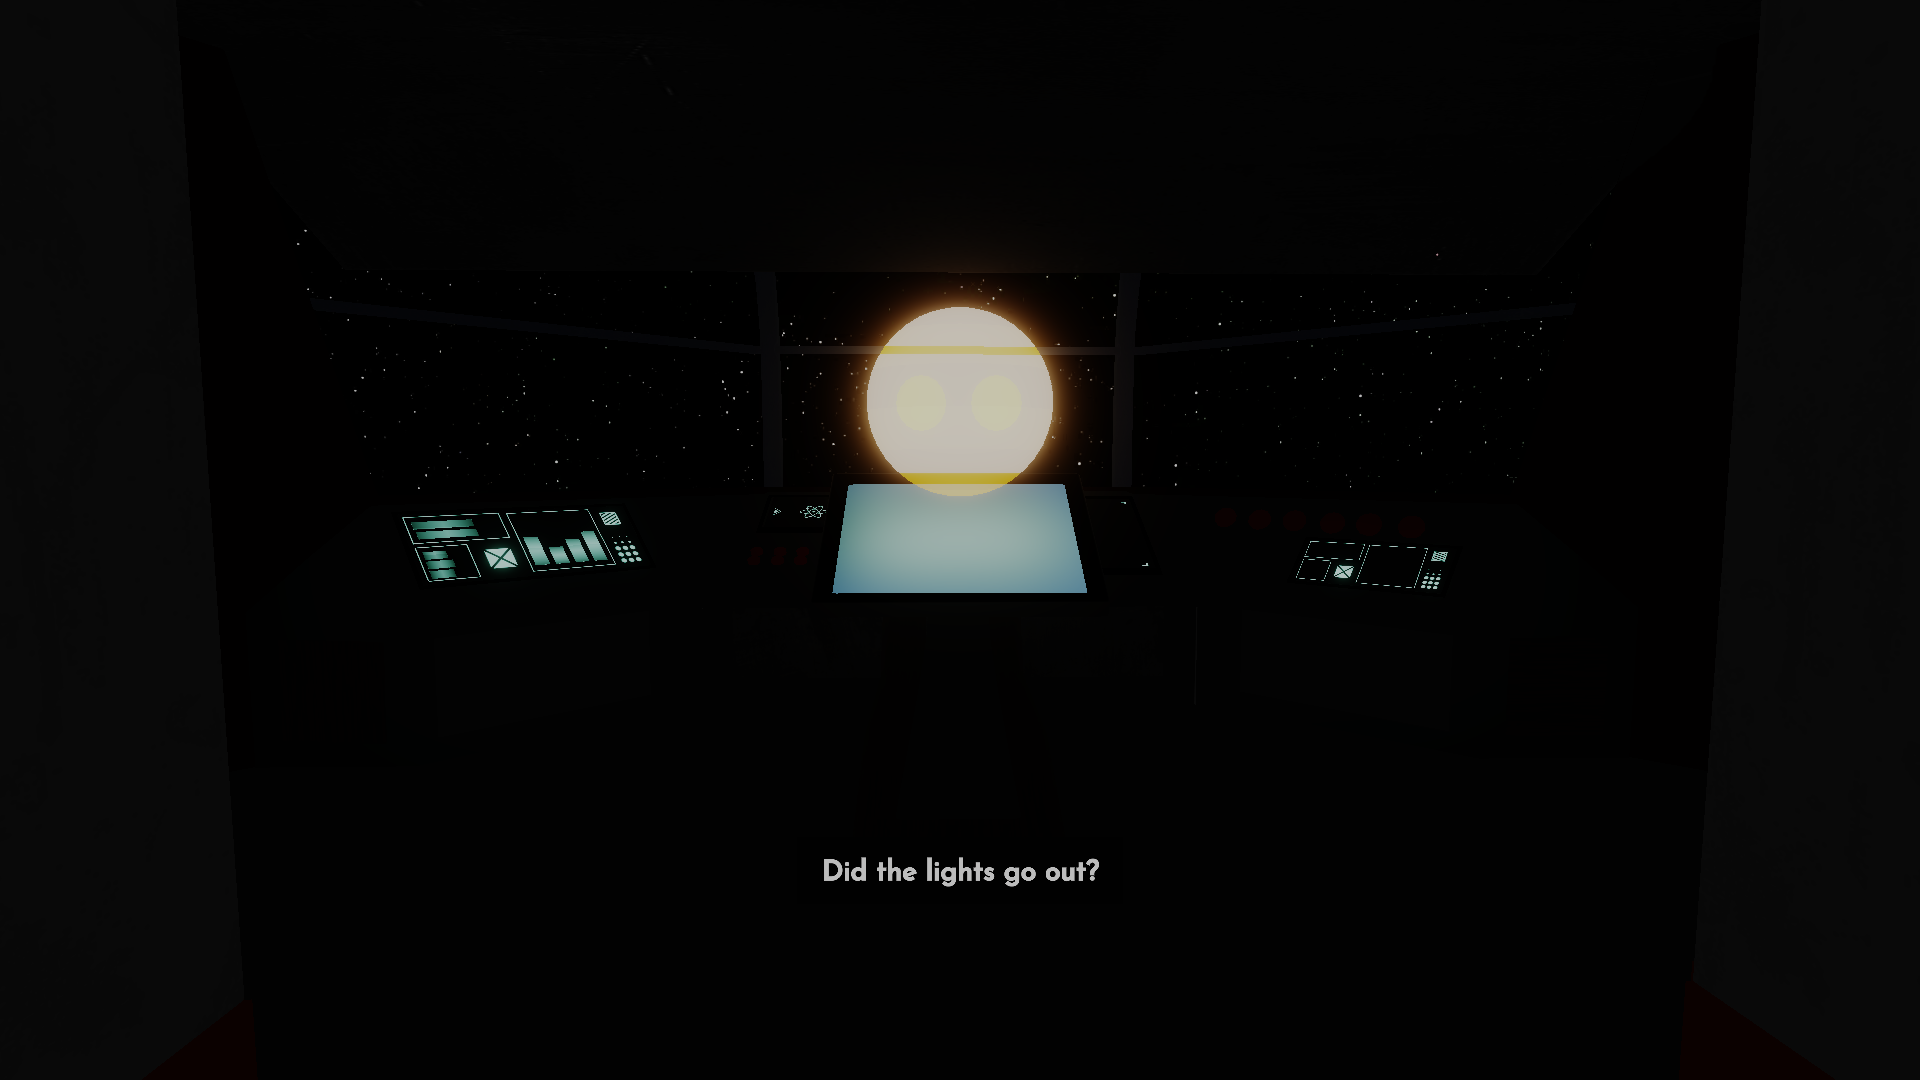 A completely dark cockpit with only the screens and a floating circular avatar lit, and captions reading "Did the lights go out?"